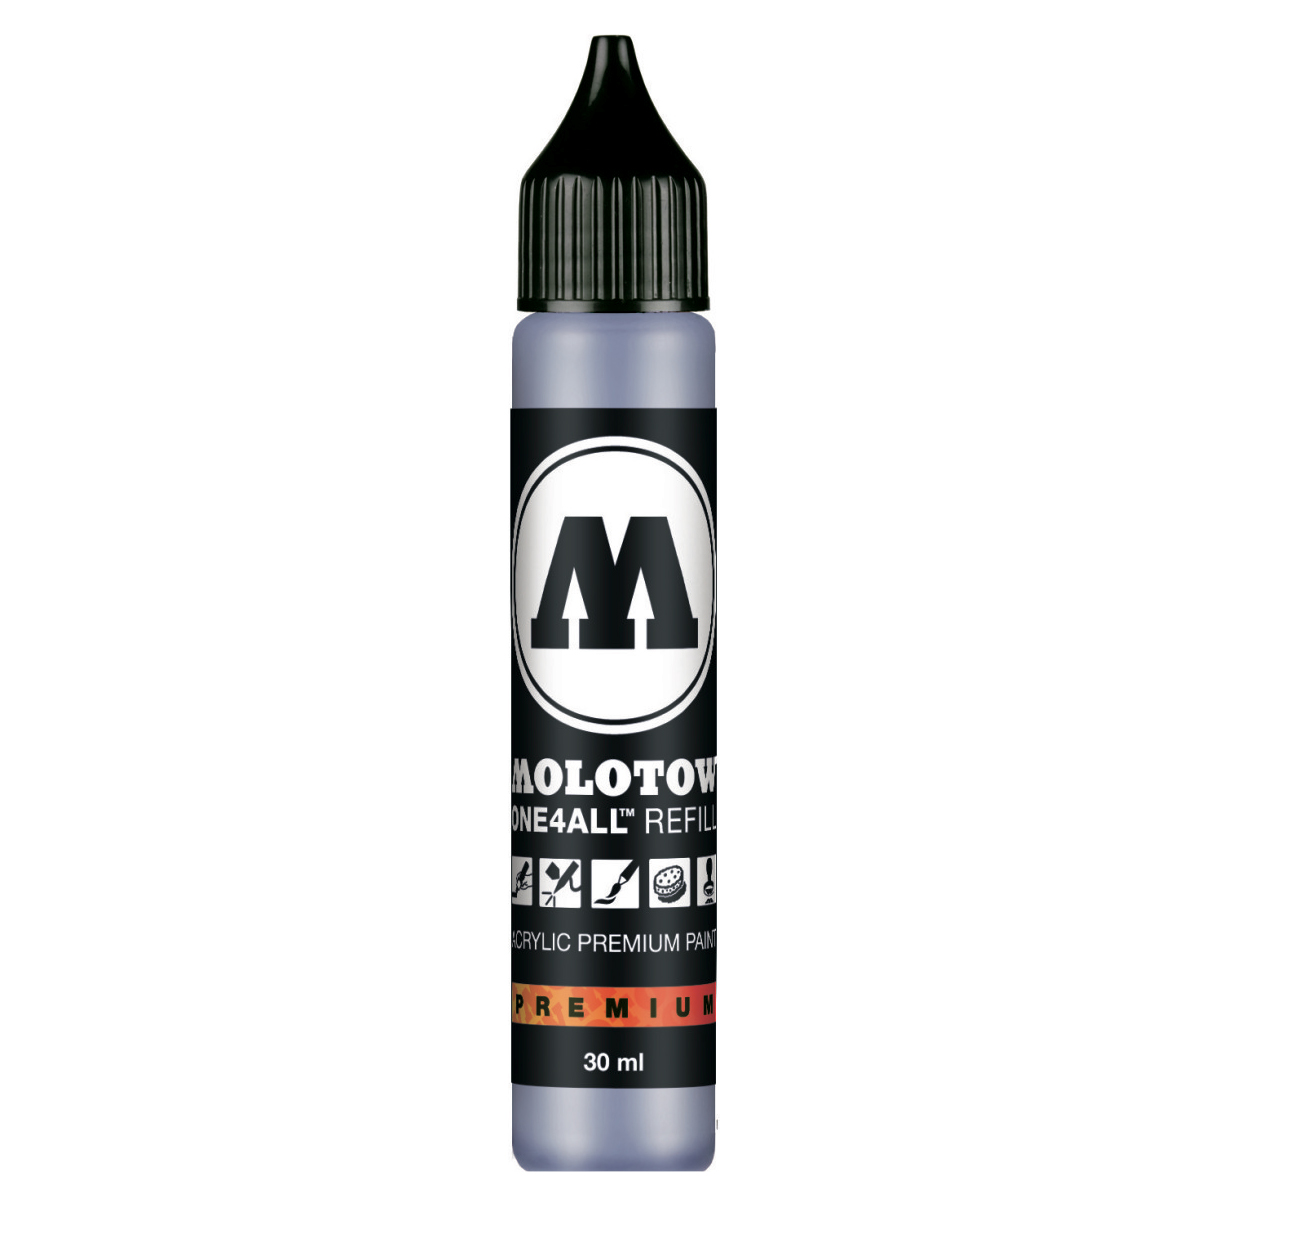 Molotow One4All Refill 30Ml Blue Violet Pstl